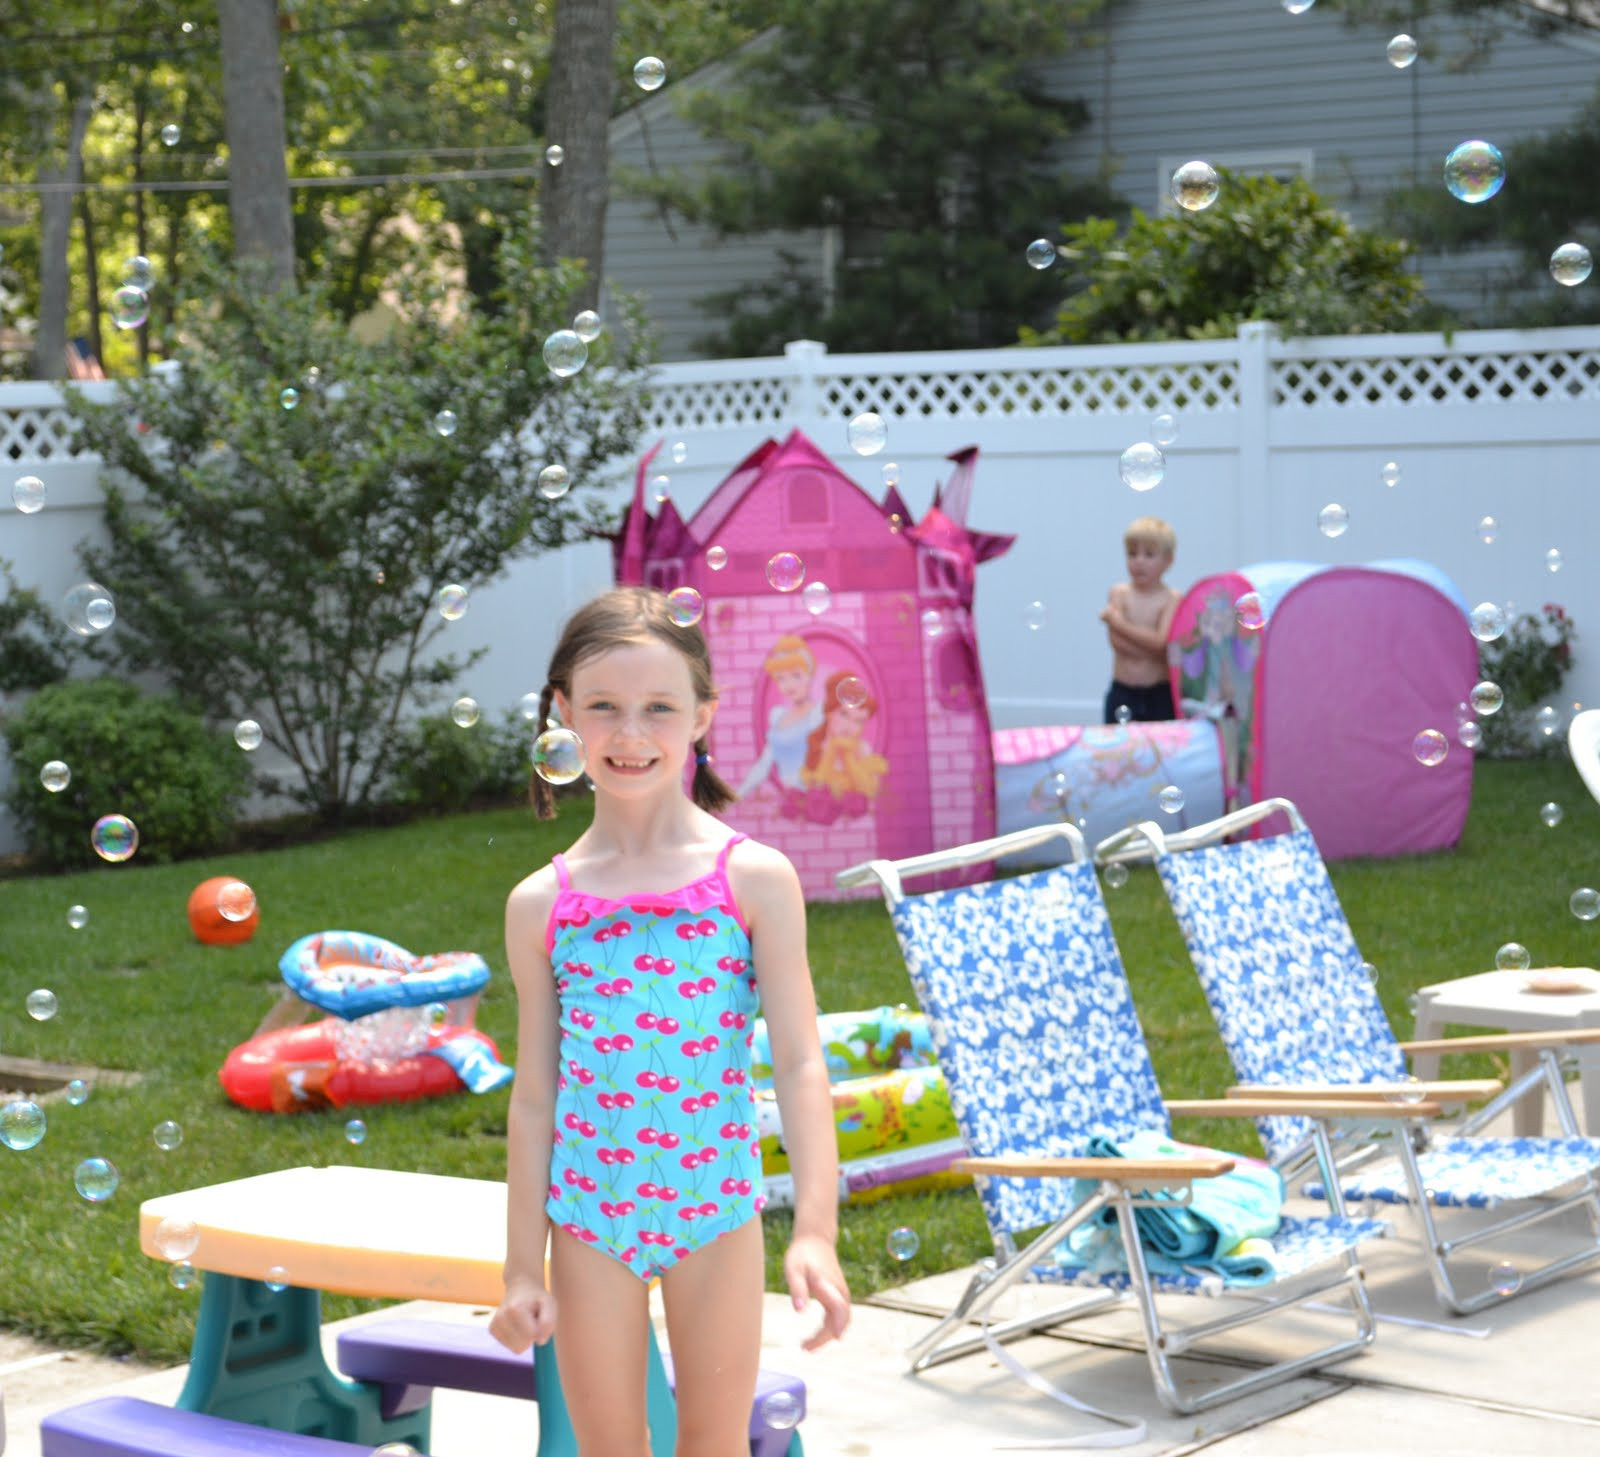 Pool Party Game Ideas Girls
 Jersey Shore Journal A Princess Party for a 3 year old